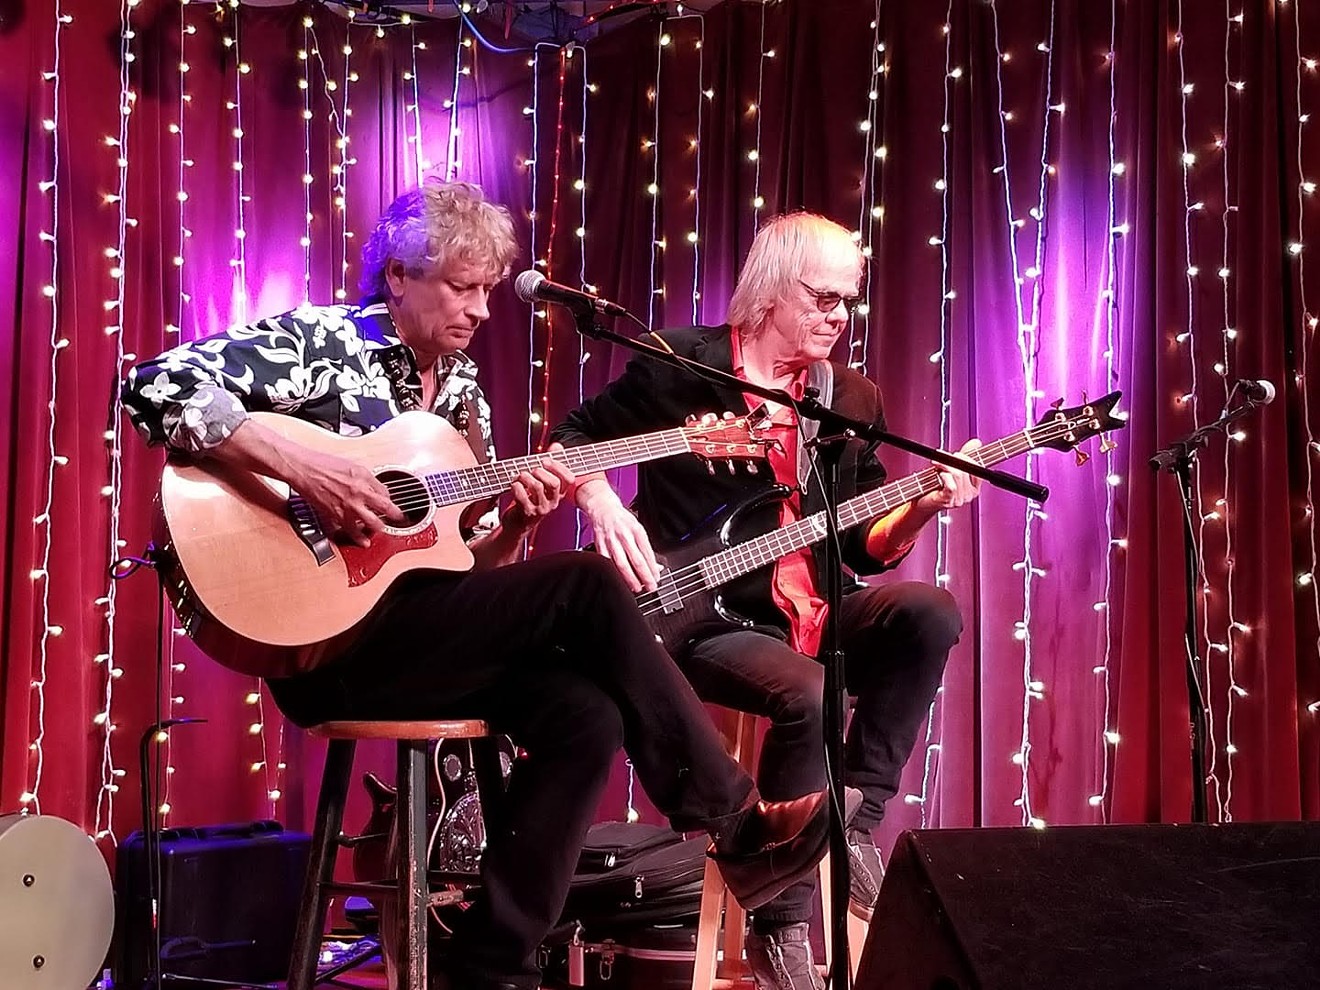 Guitarist Jim "Kimo" West (left) and bass player Stephen Jay perform at the Red Light Cafe in Atlanta for their Parallel Universe Tour, which comes to Poor David's Pub in Dallas on Friday.